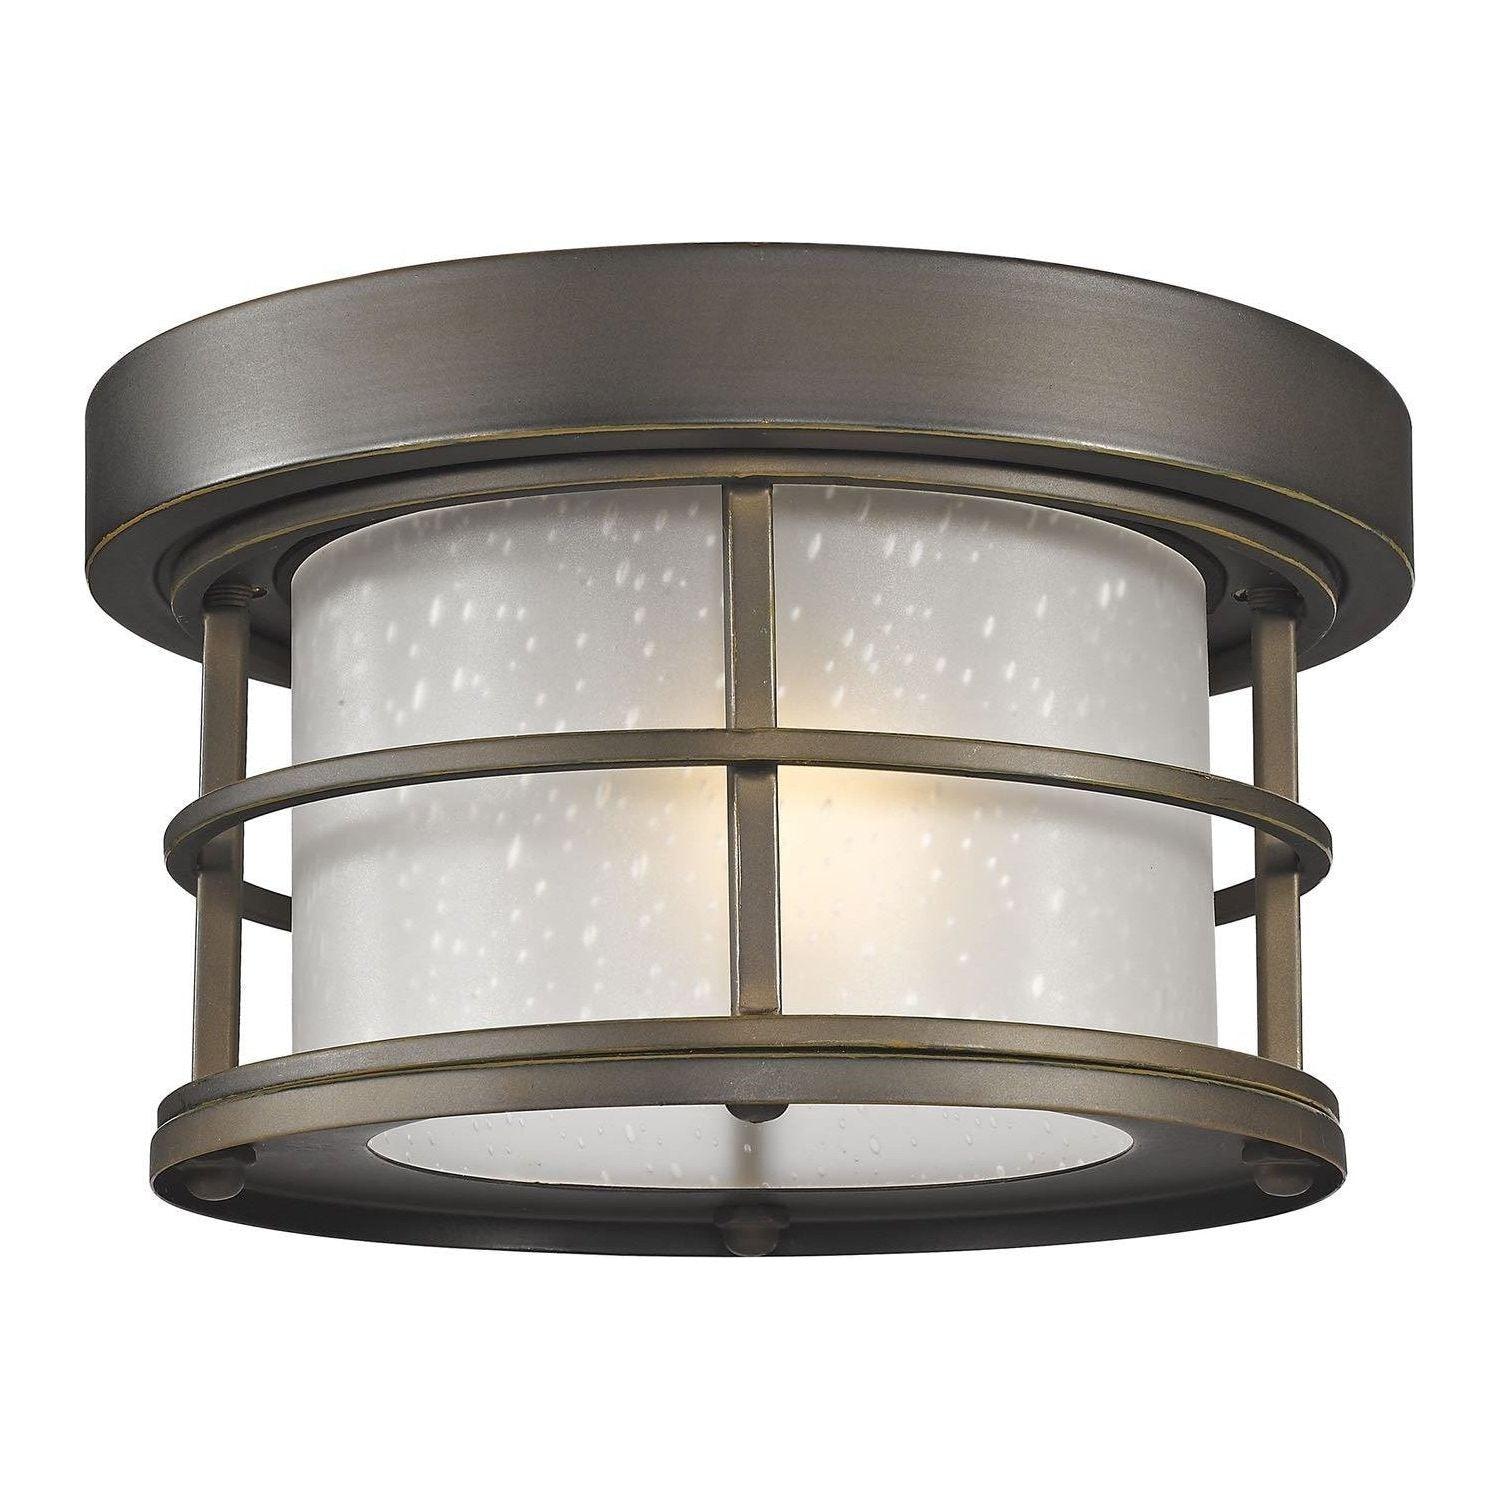 Z-Lite - Exterior Additions Outdoor Ceiling Light - Lights Canada